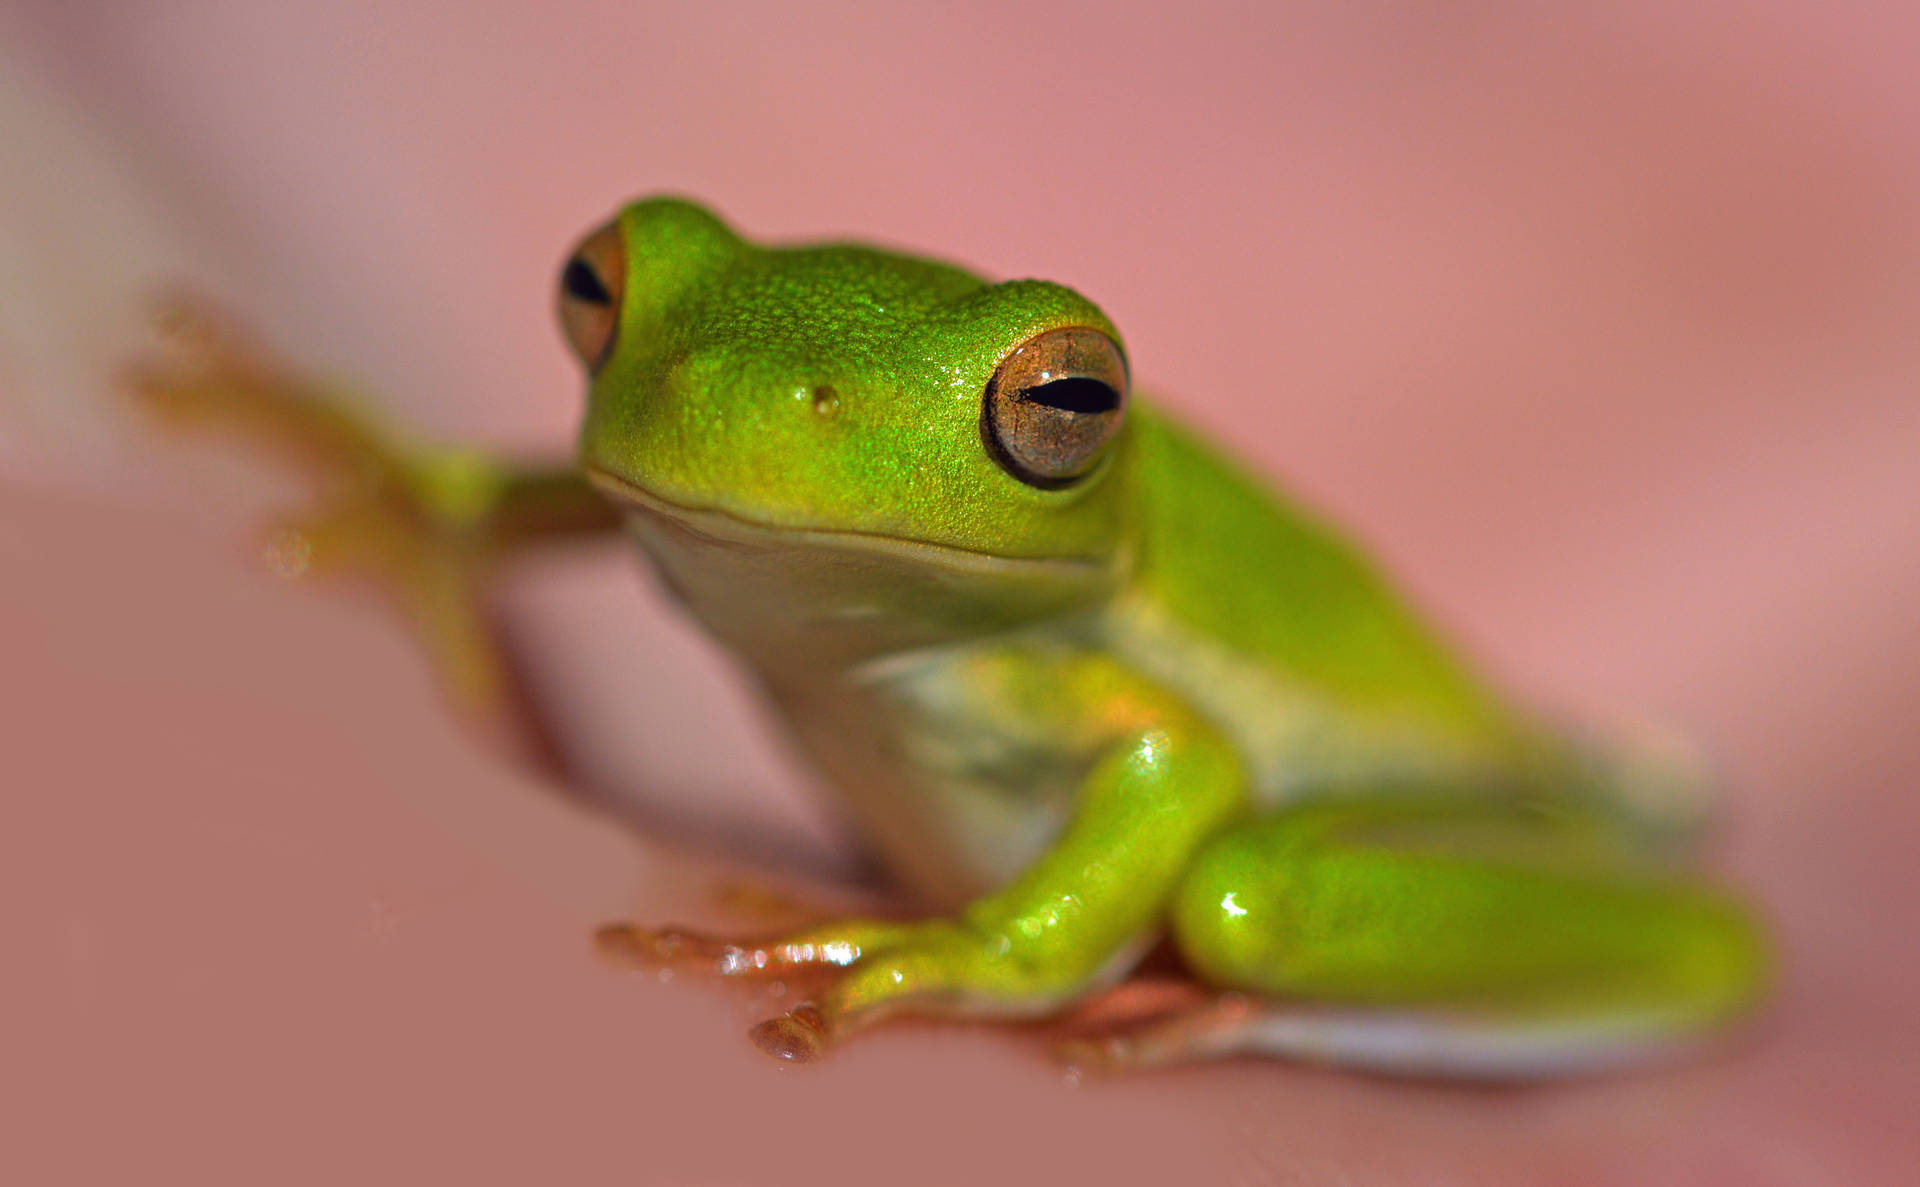 Green Frog In Pink Background